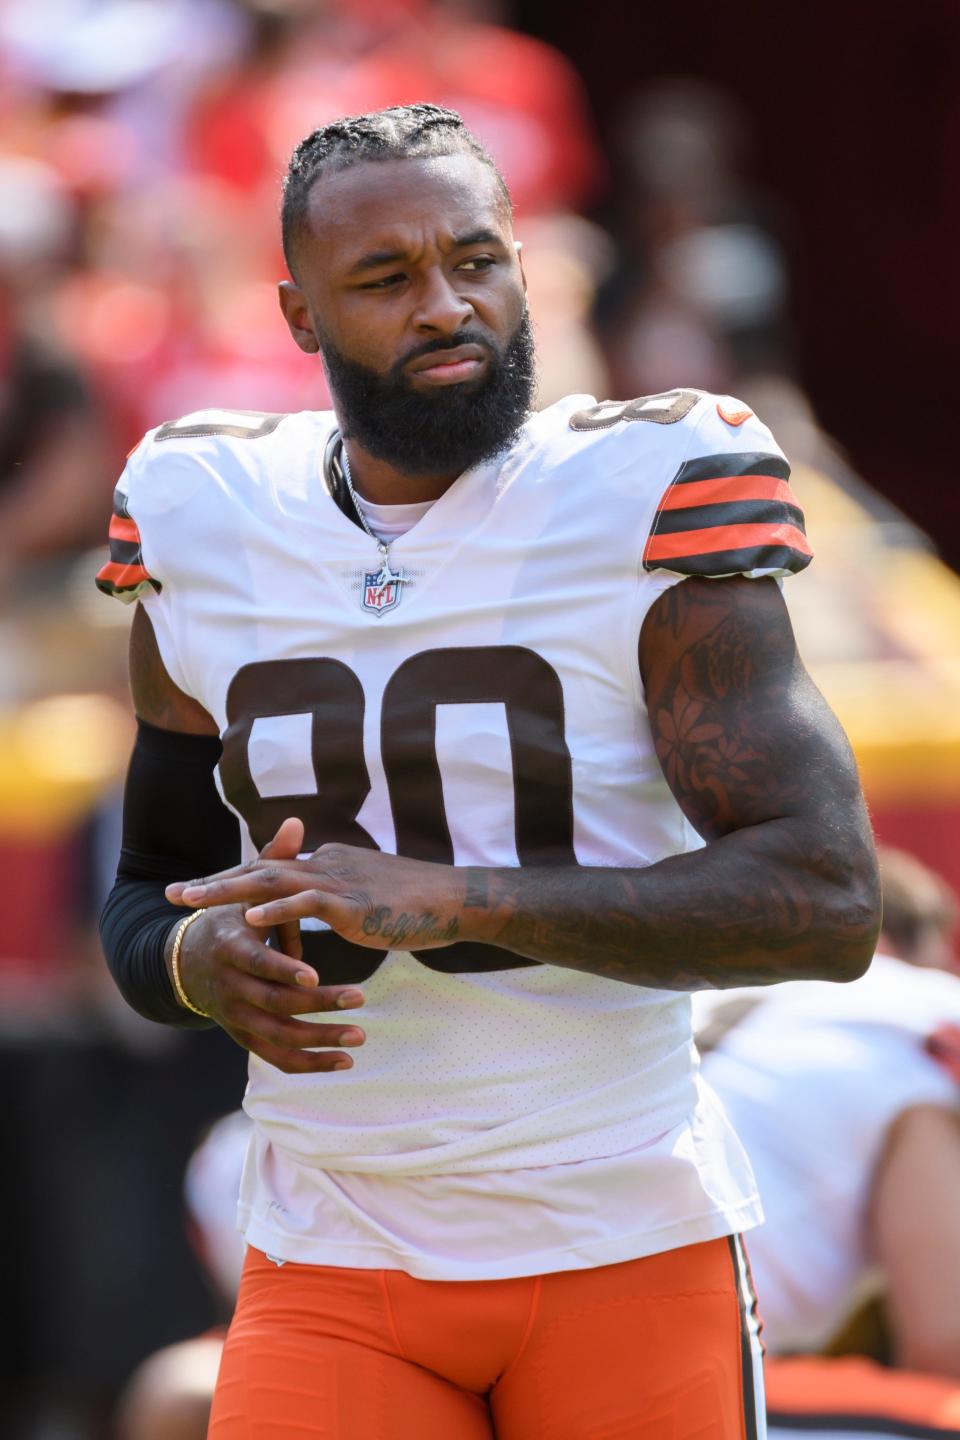 In the Browns' opener, wide receiver Jarvis Landry had five catches on five targets for 71 yards and rushed twice for 13 yards, including a 5-yard touchdown.